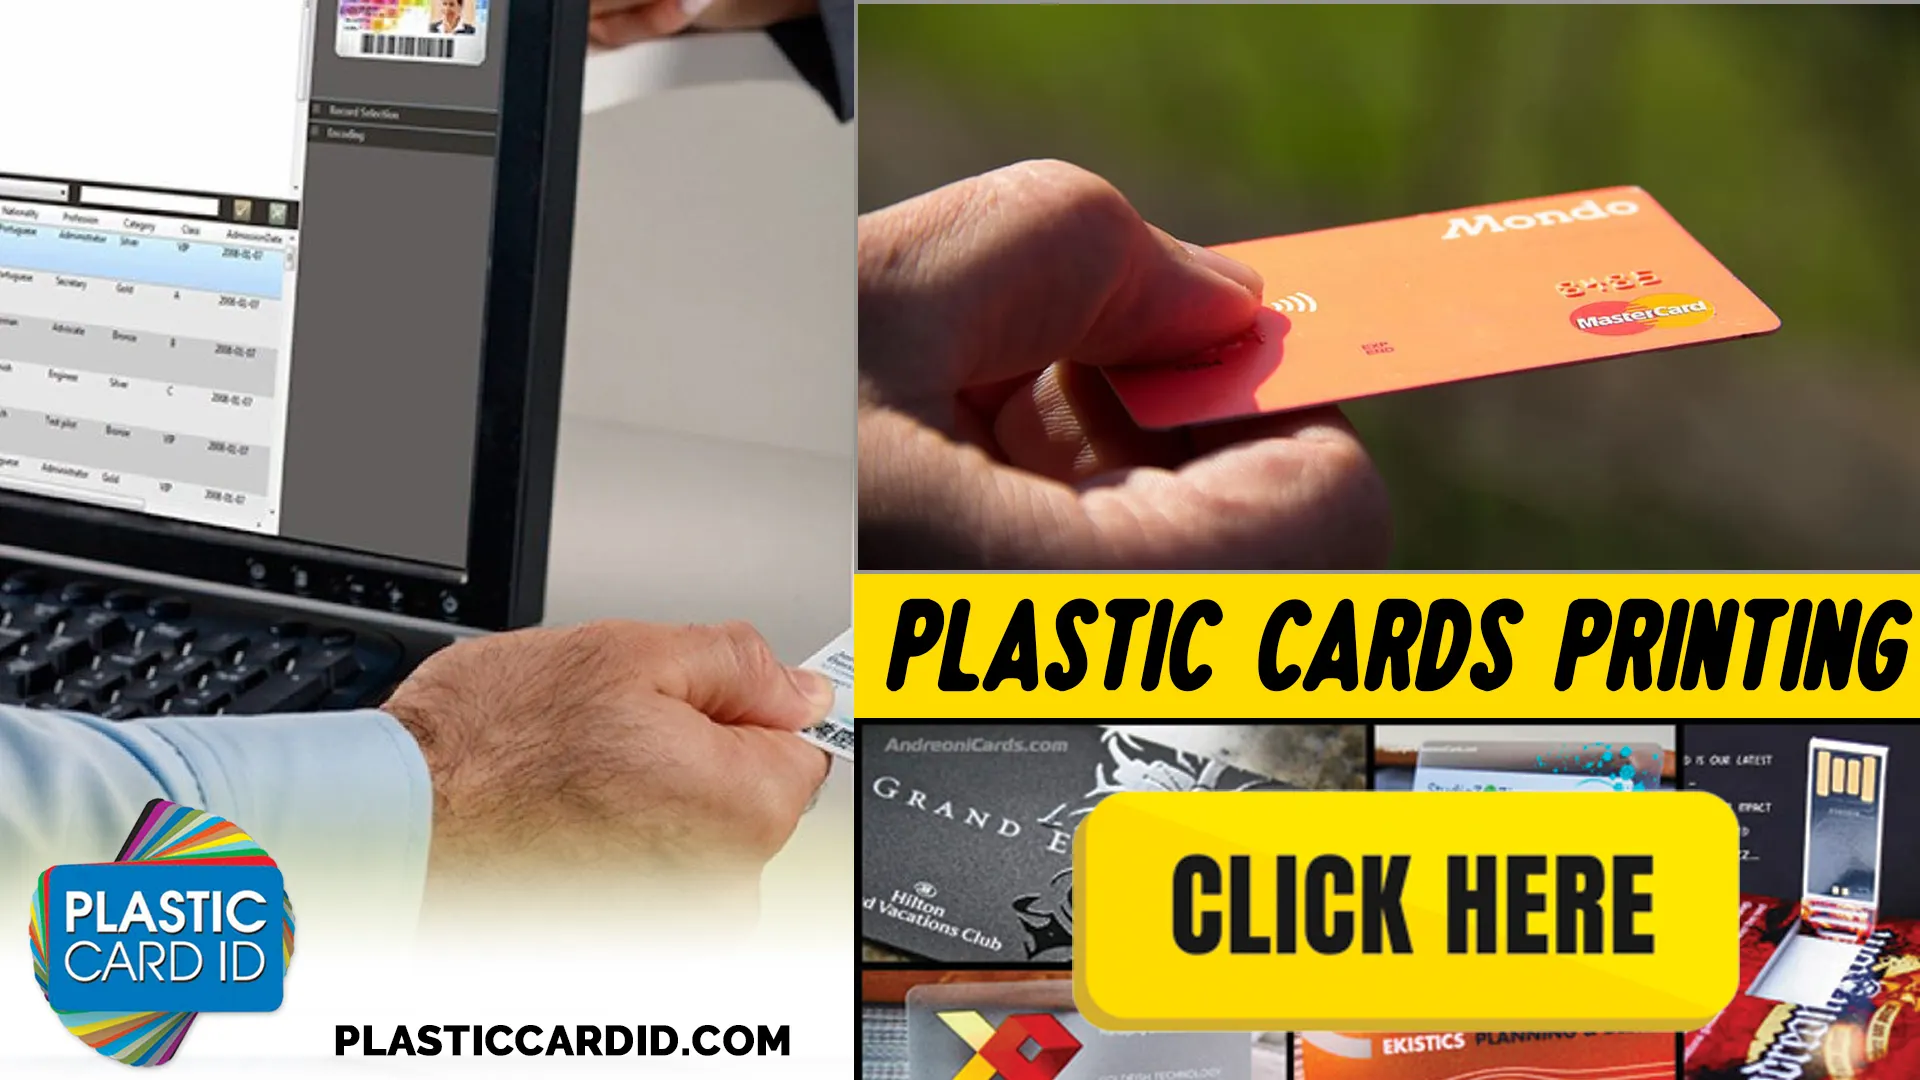 Welcome to Plastic Card ID
, Your Gateway to the Future of Smart Card Printing